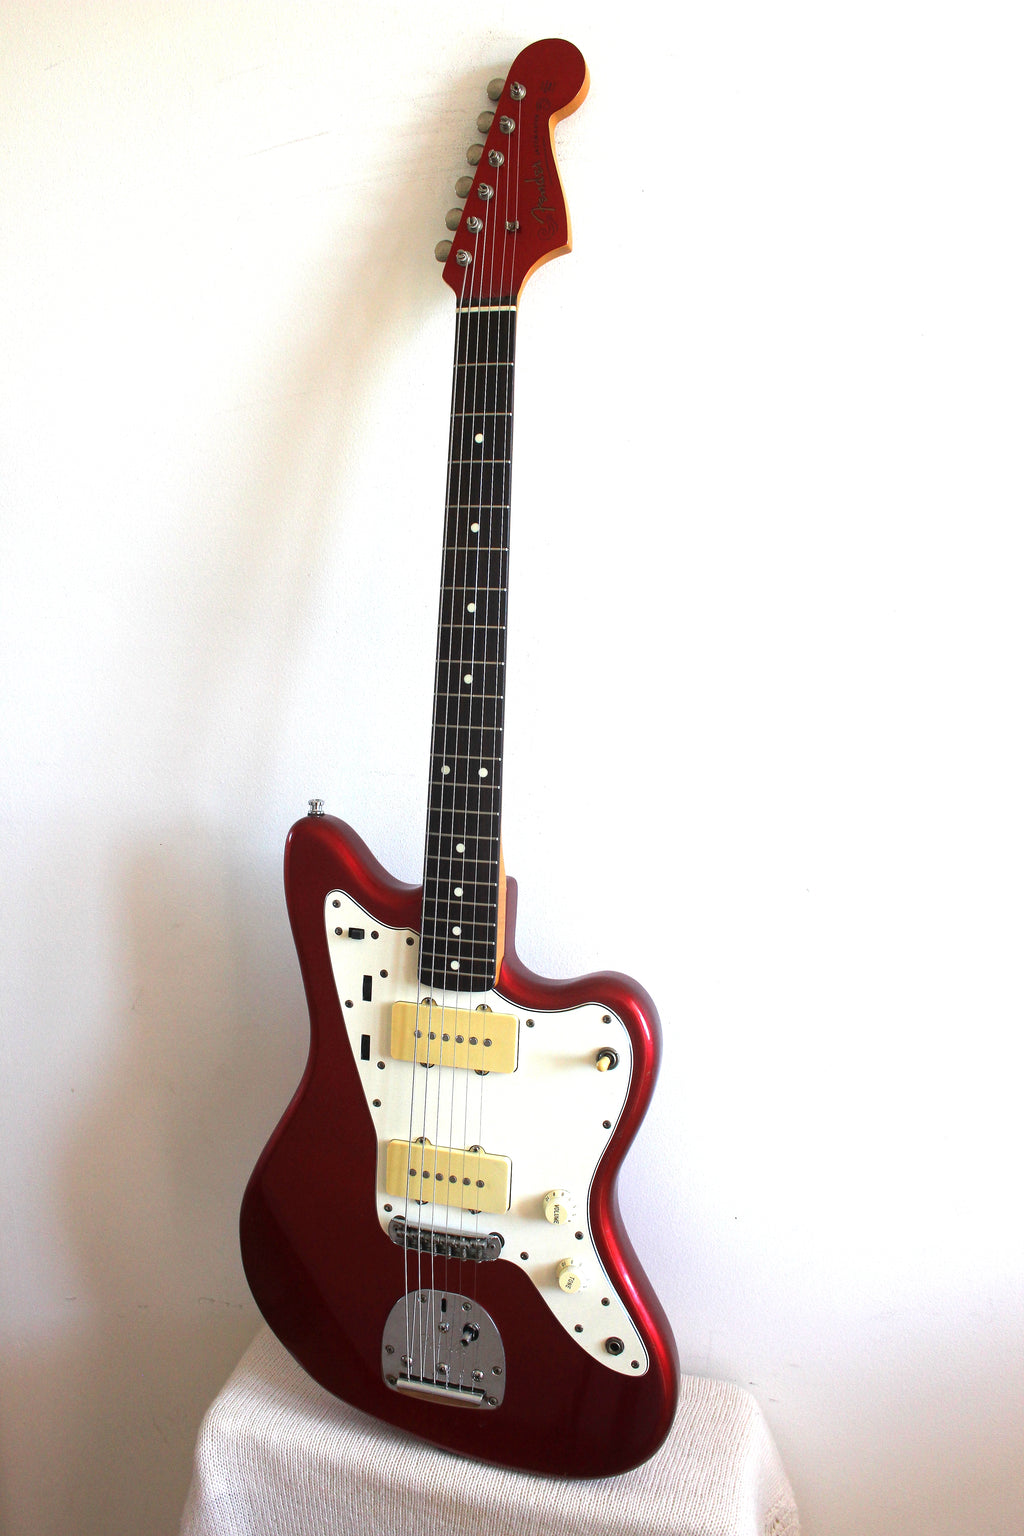 Used Fender Jazzmaster '66 Reissue Candy Apple Red